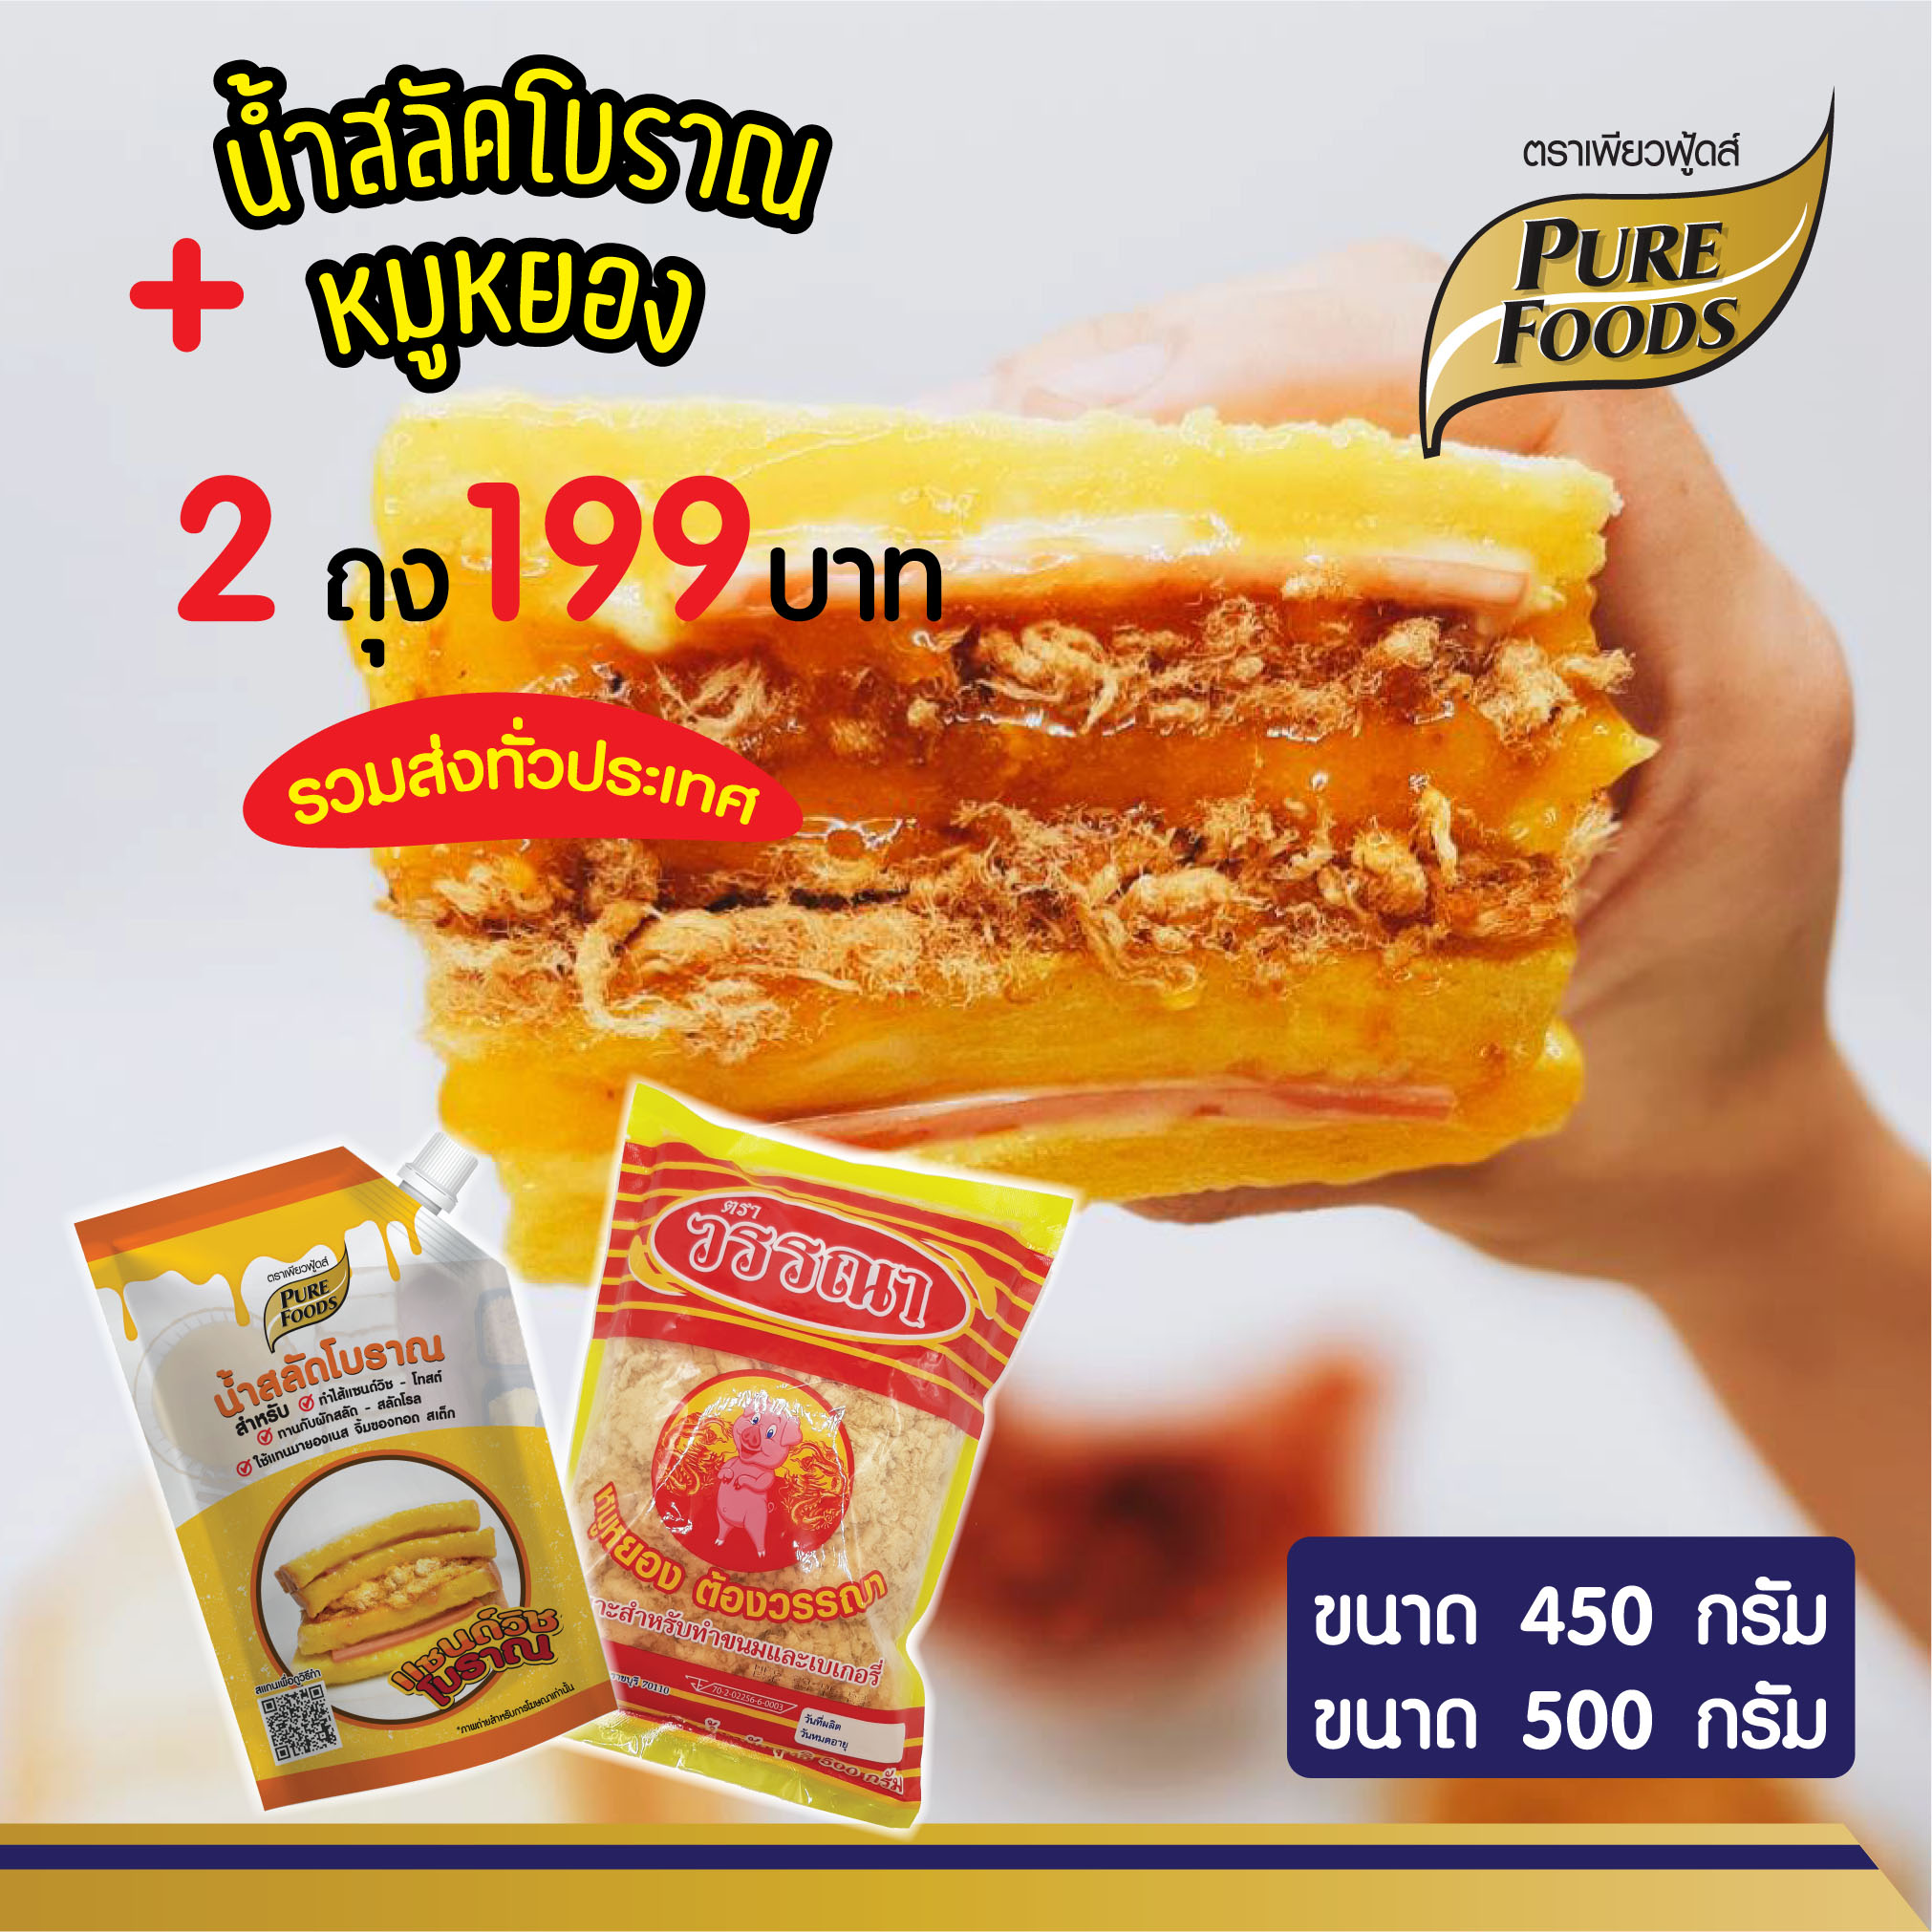 Boran Salad Dressing & Flossy Pork (THB 199 - Free Delivery in Thailand)